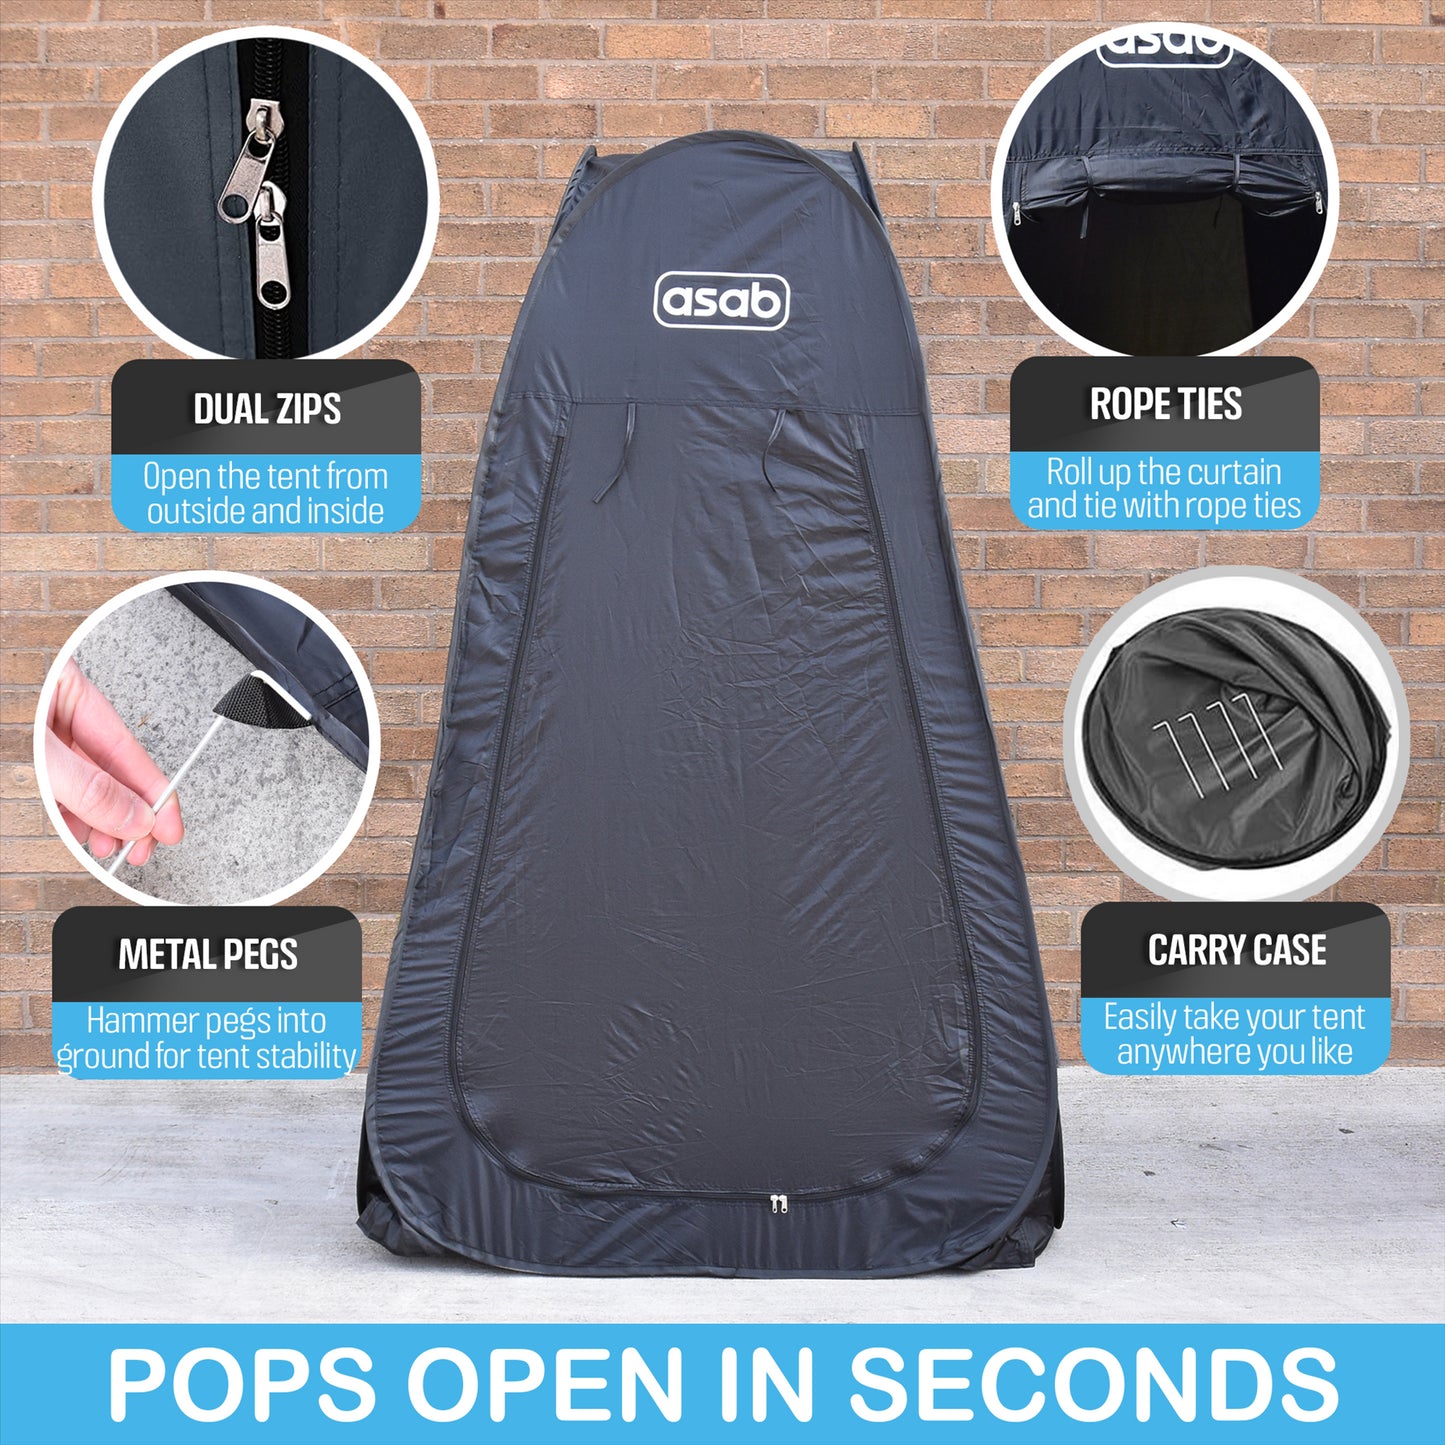 Set Up Camp Easily With Portable Pop Up Tent